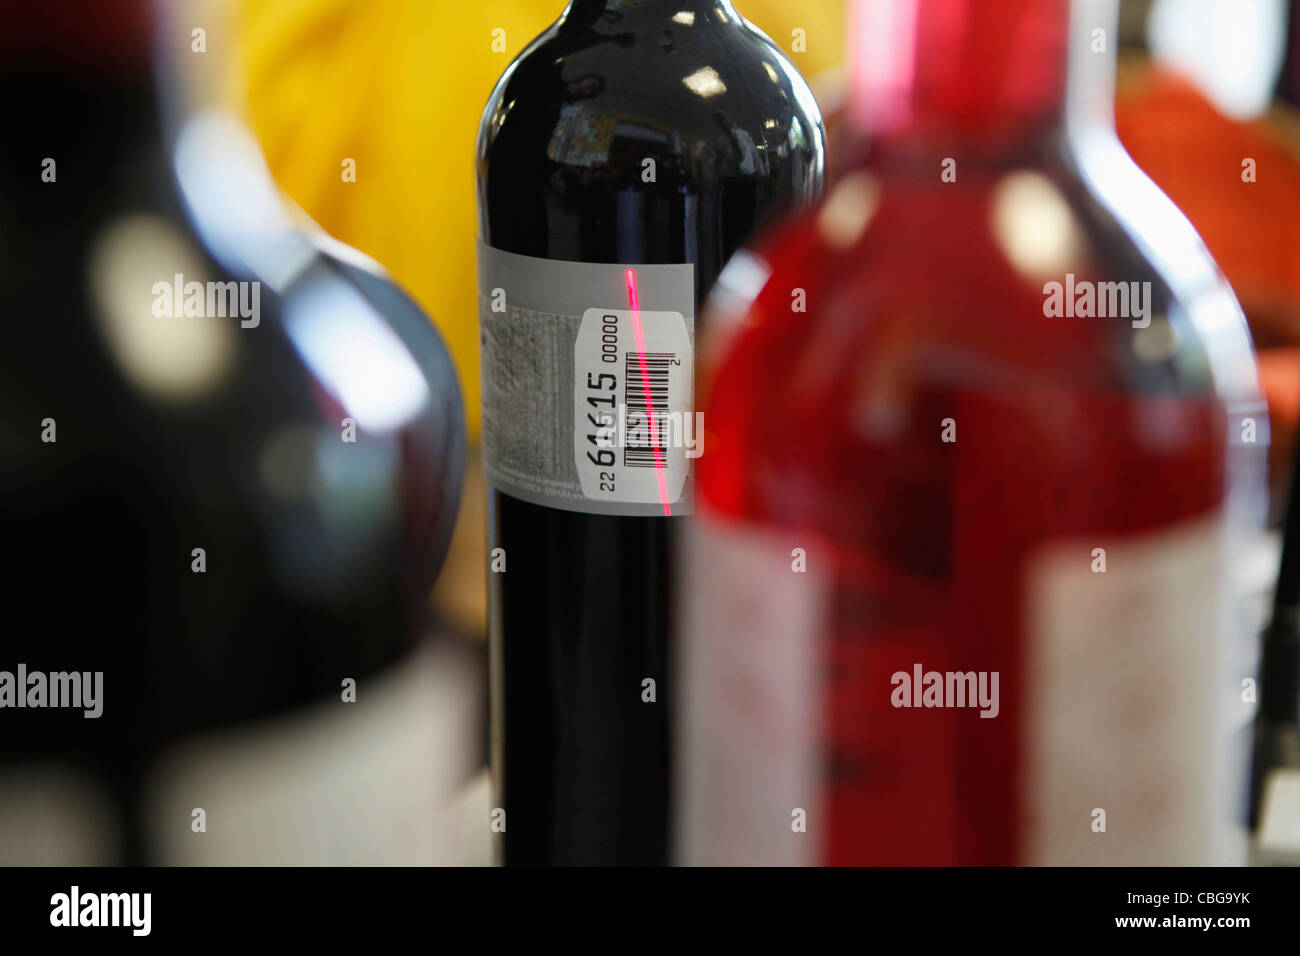 Wine bottle being scanned Stock Photo